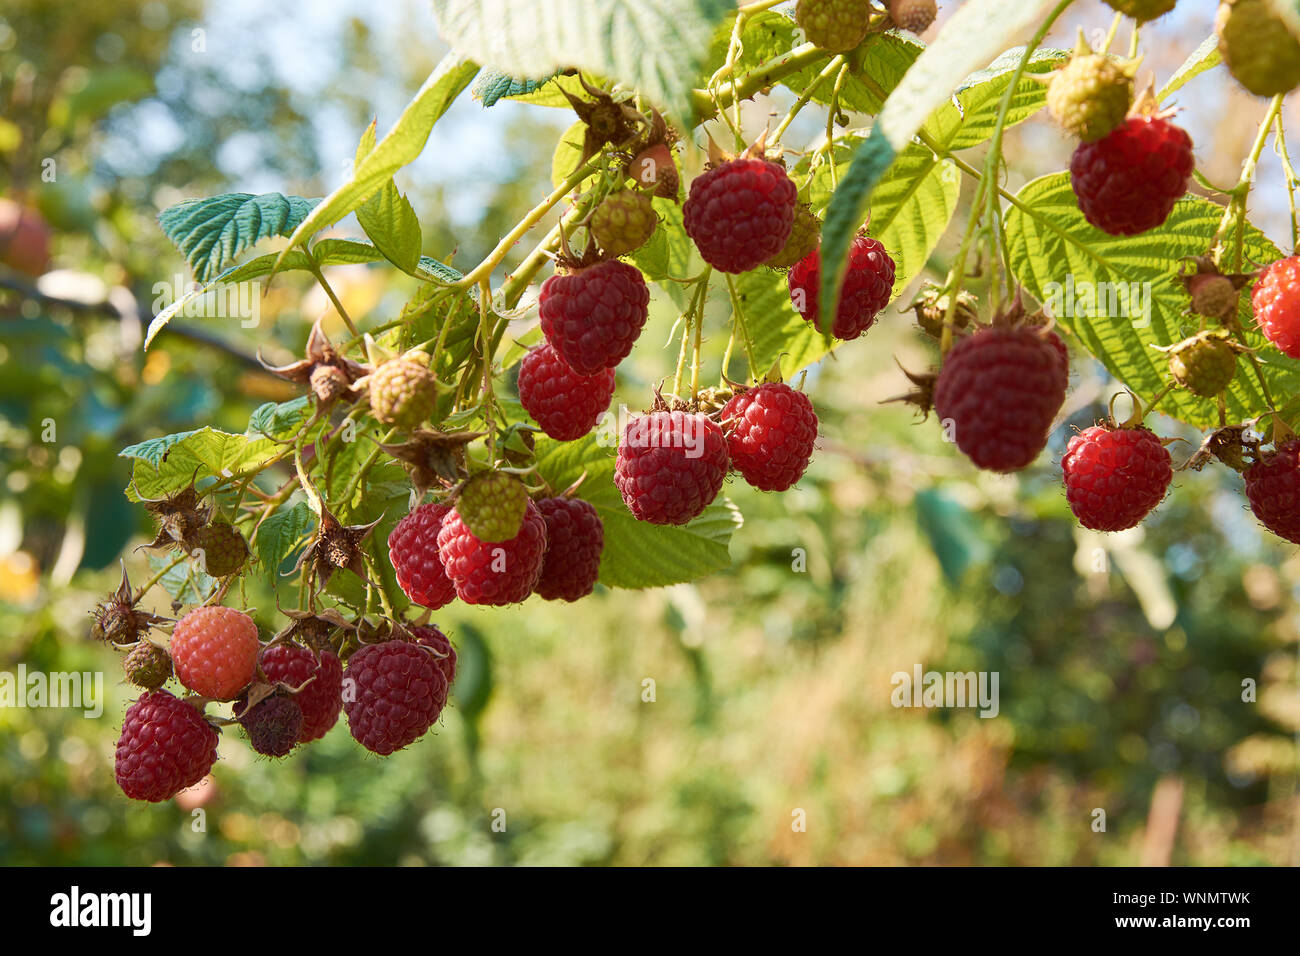 Branch of fall-bearing raspberry with many red berries Stock Photo